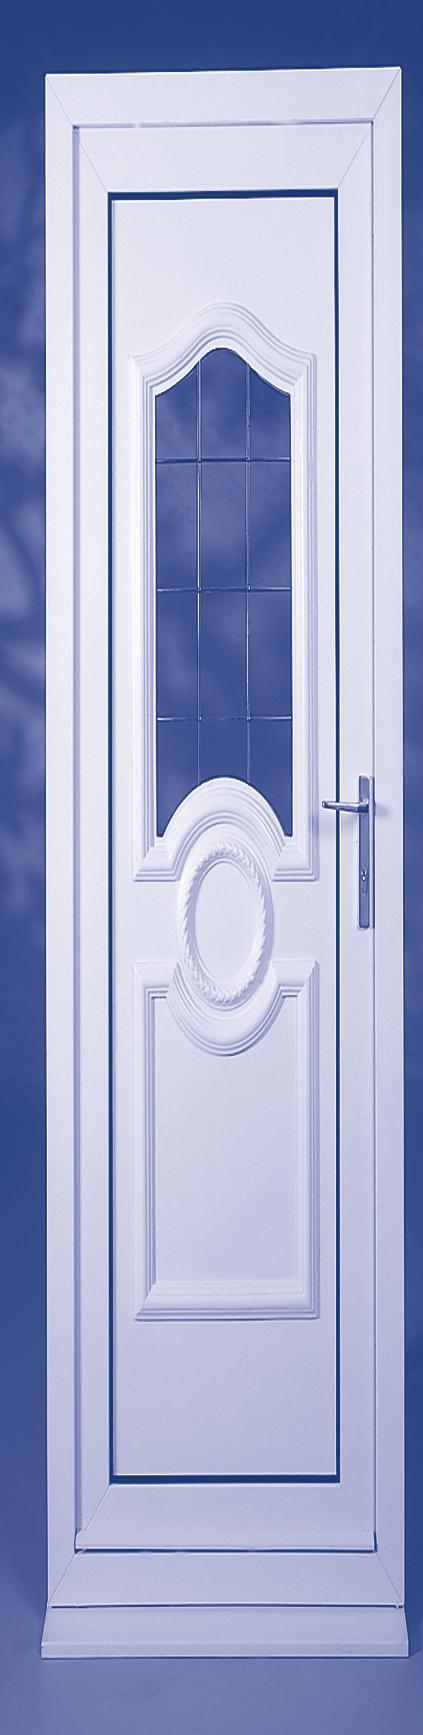 Choose from a range of quality PVC-uD oors Residential Doors There are a wide range of residential door styles available to compliment the